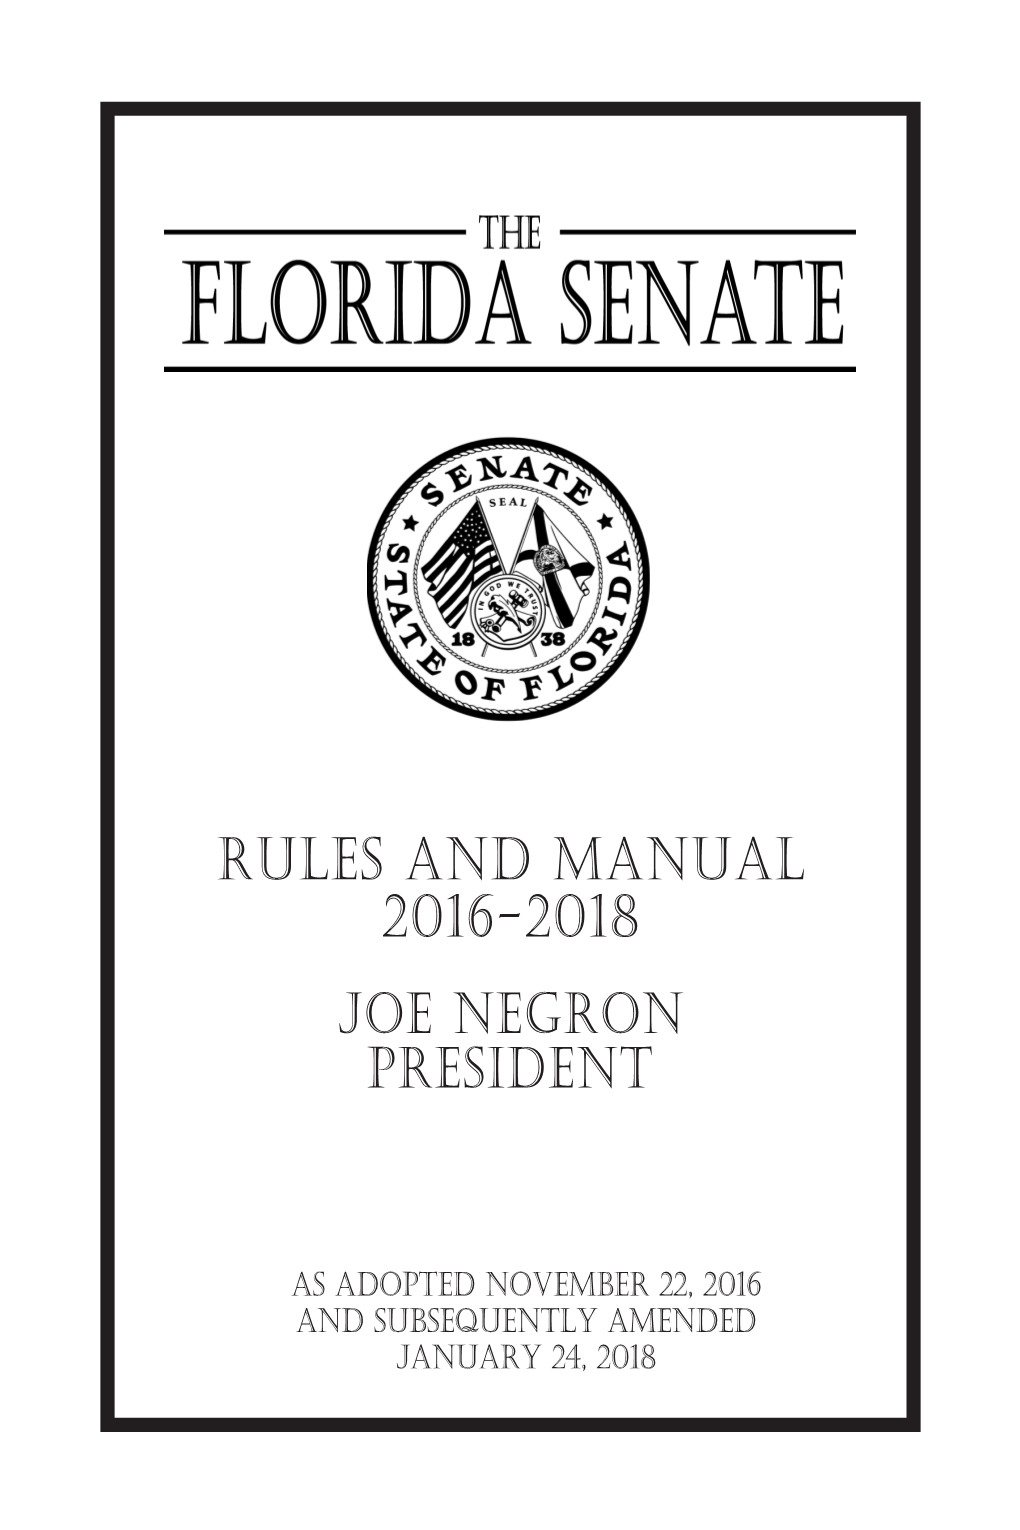 Senate Rules — Table of Contents